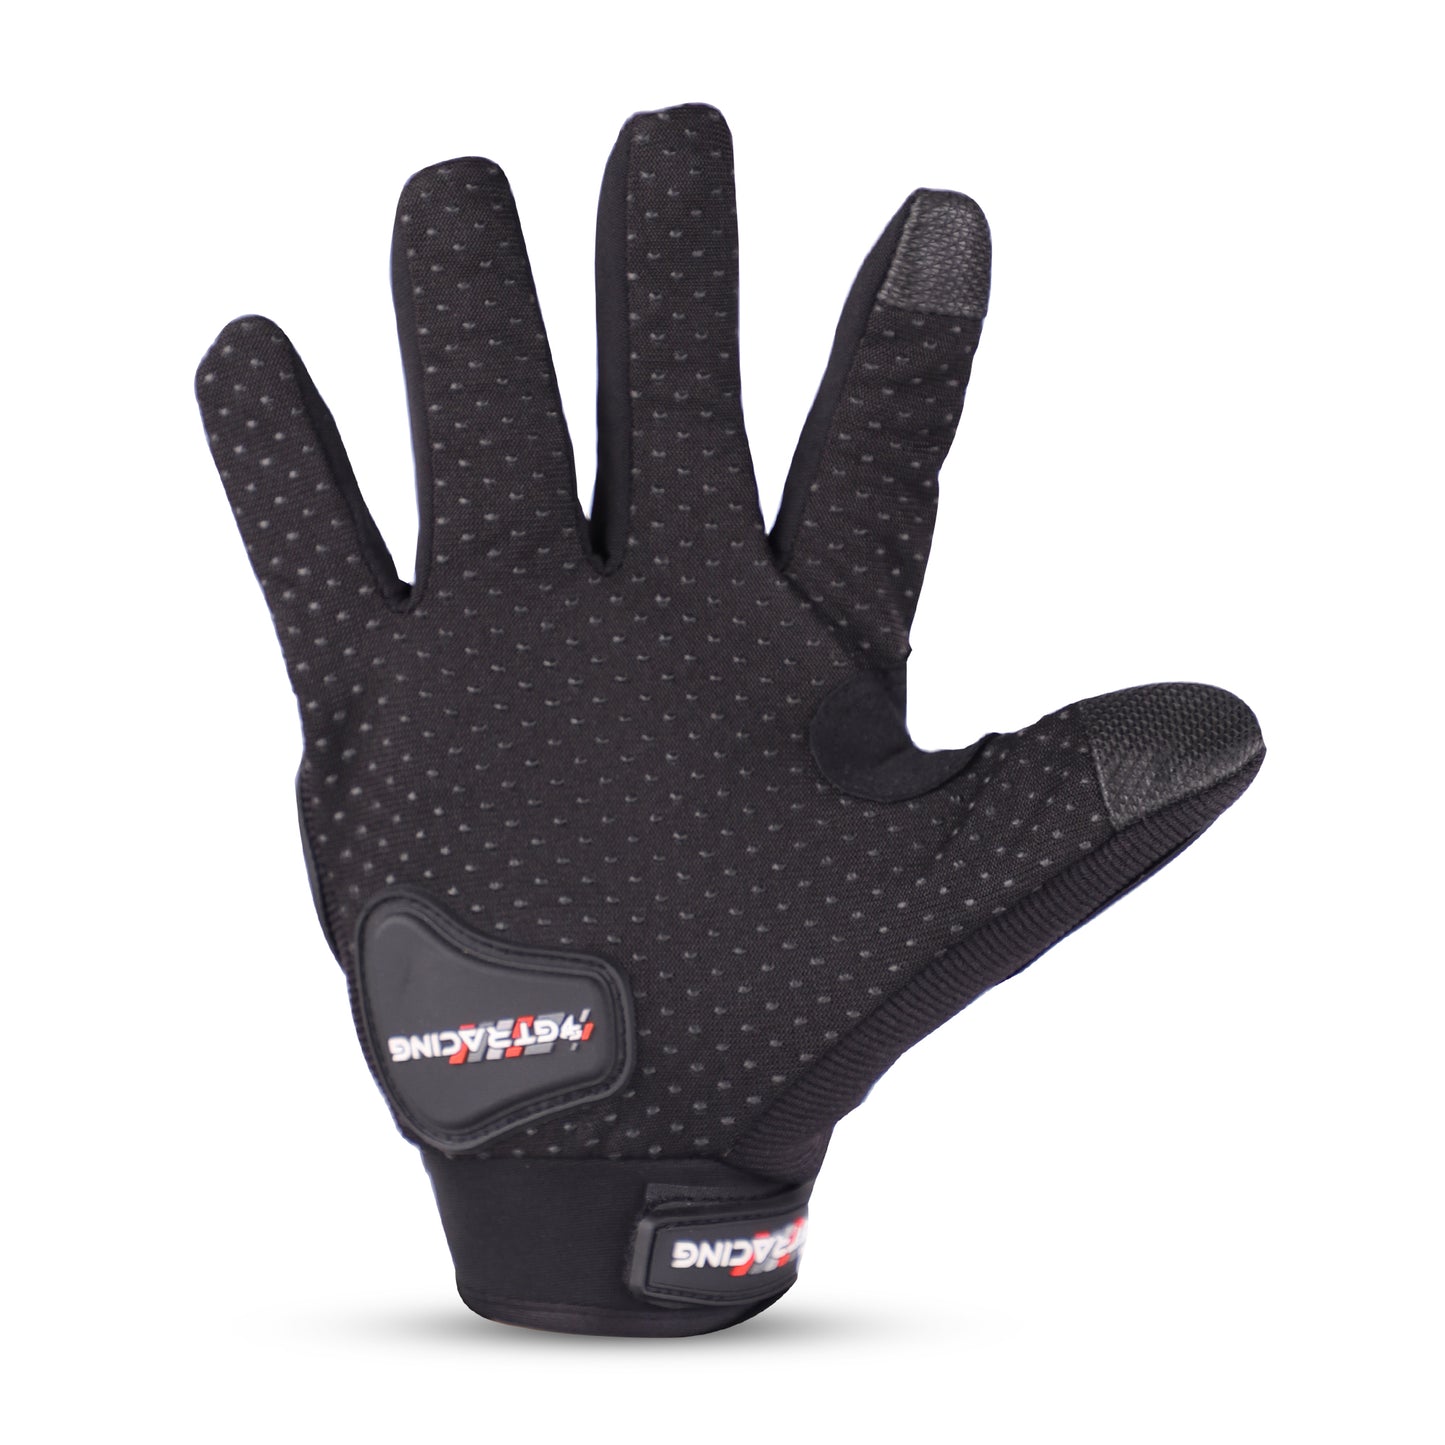 Steelbird GT-17 Full Finger Bike Riding Gloves with Touch Screen Sensitivity at Thumb and Index Finger, Protective Off-Road Motorbike Racing (Black)